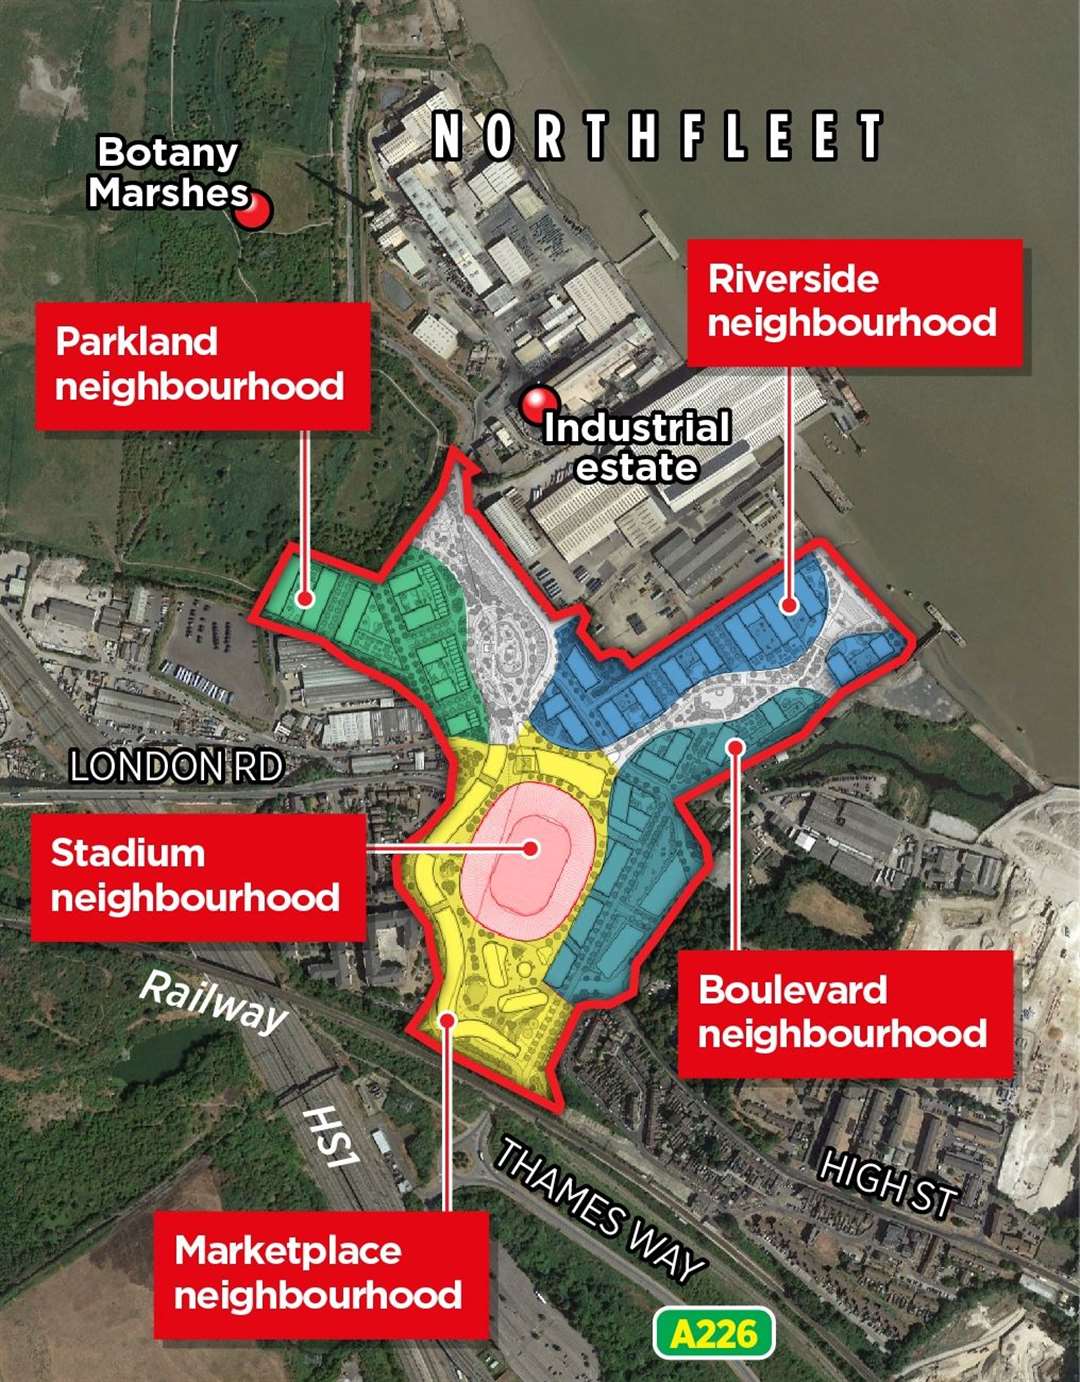 There will be five neighbourhoods created